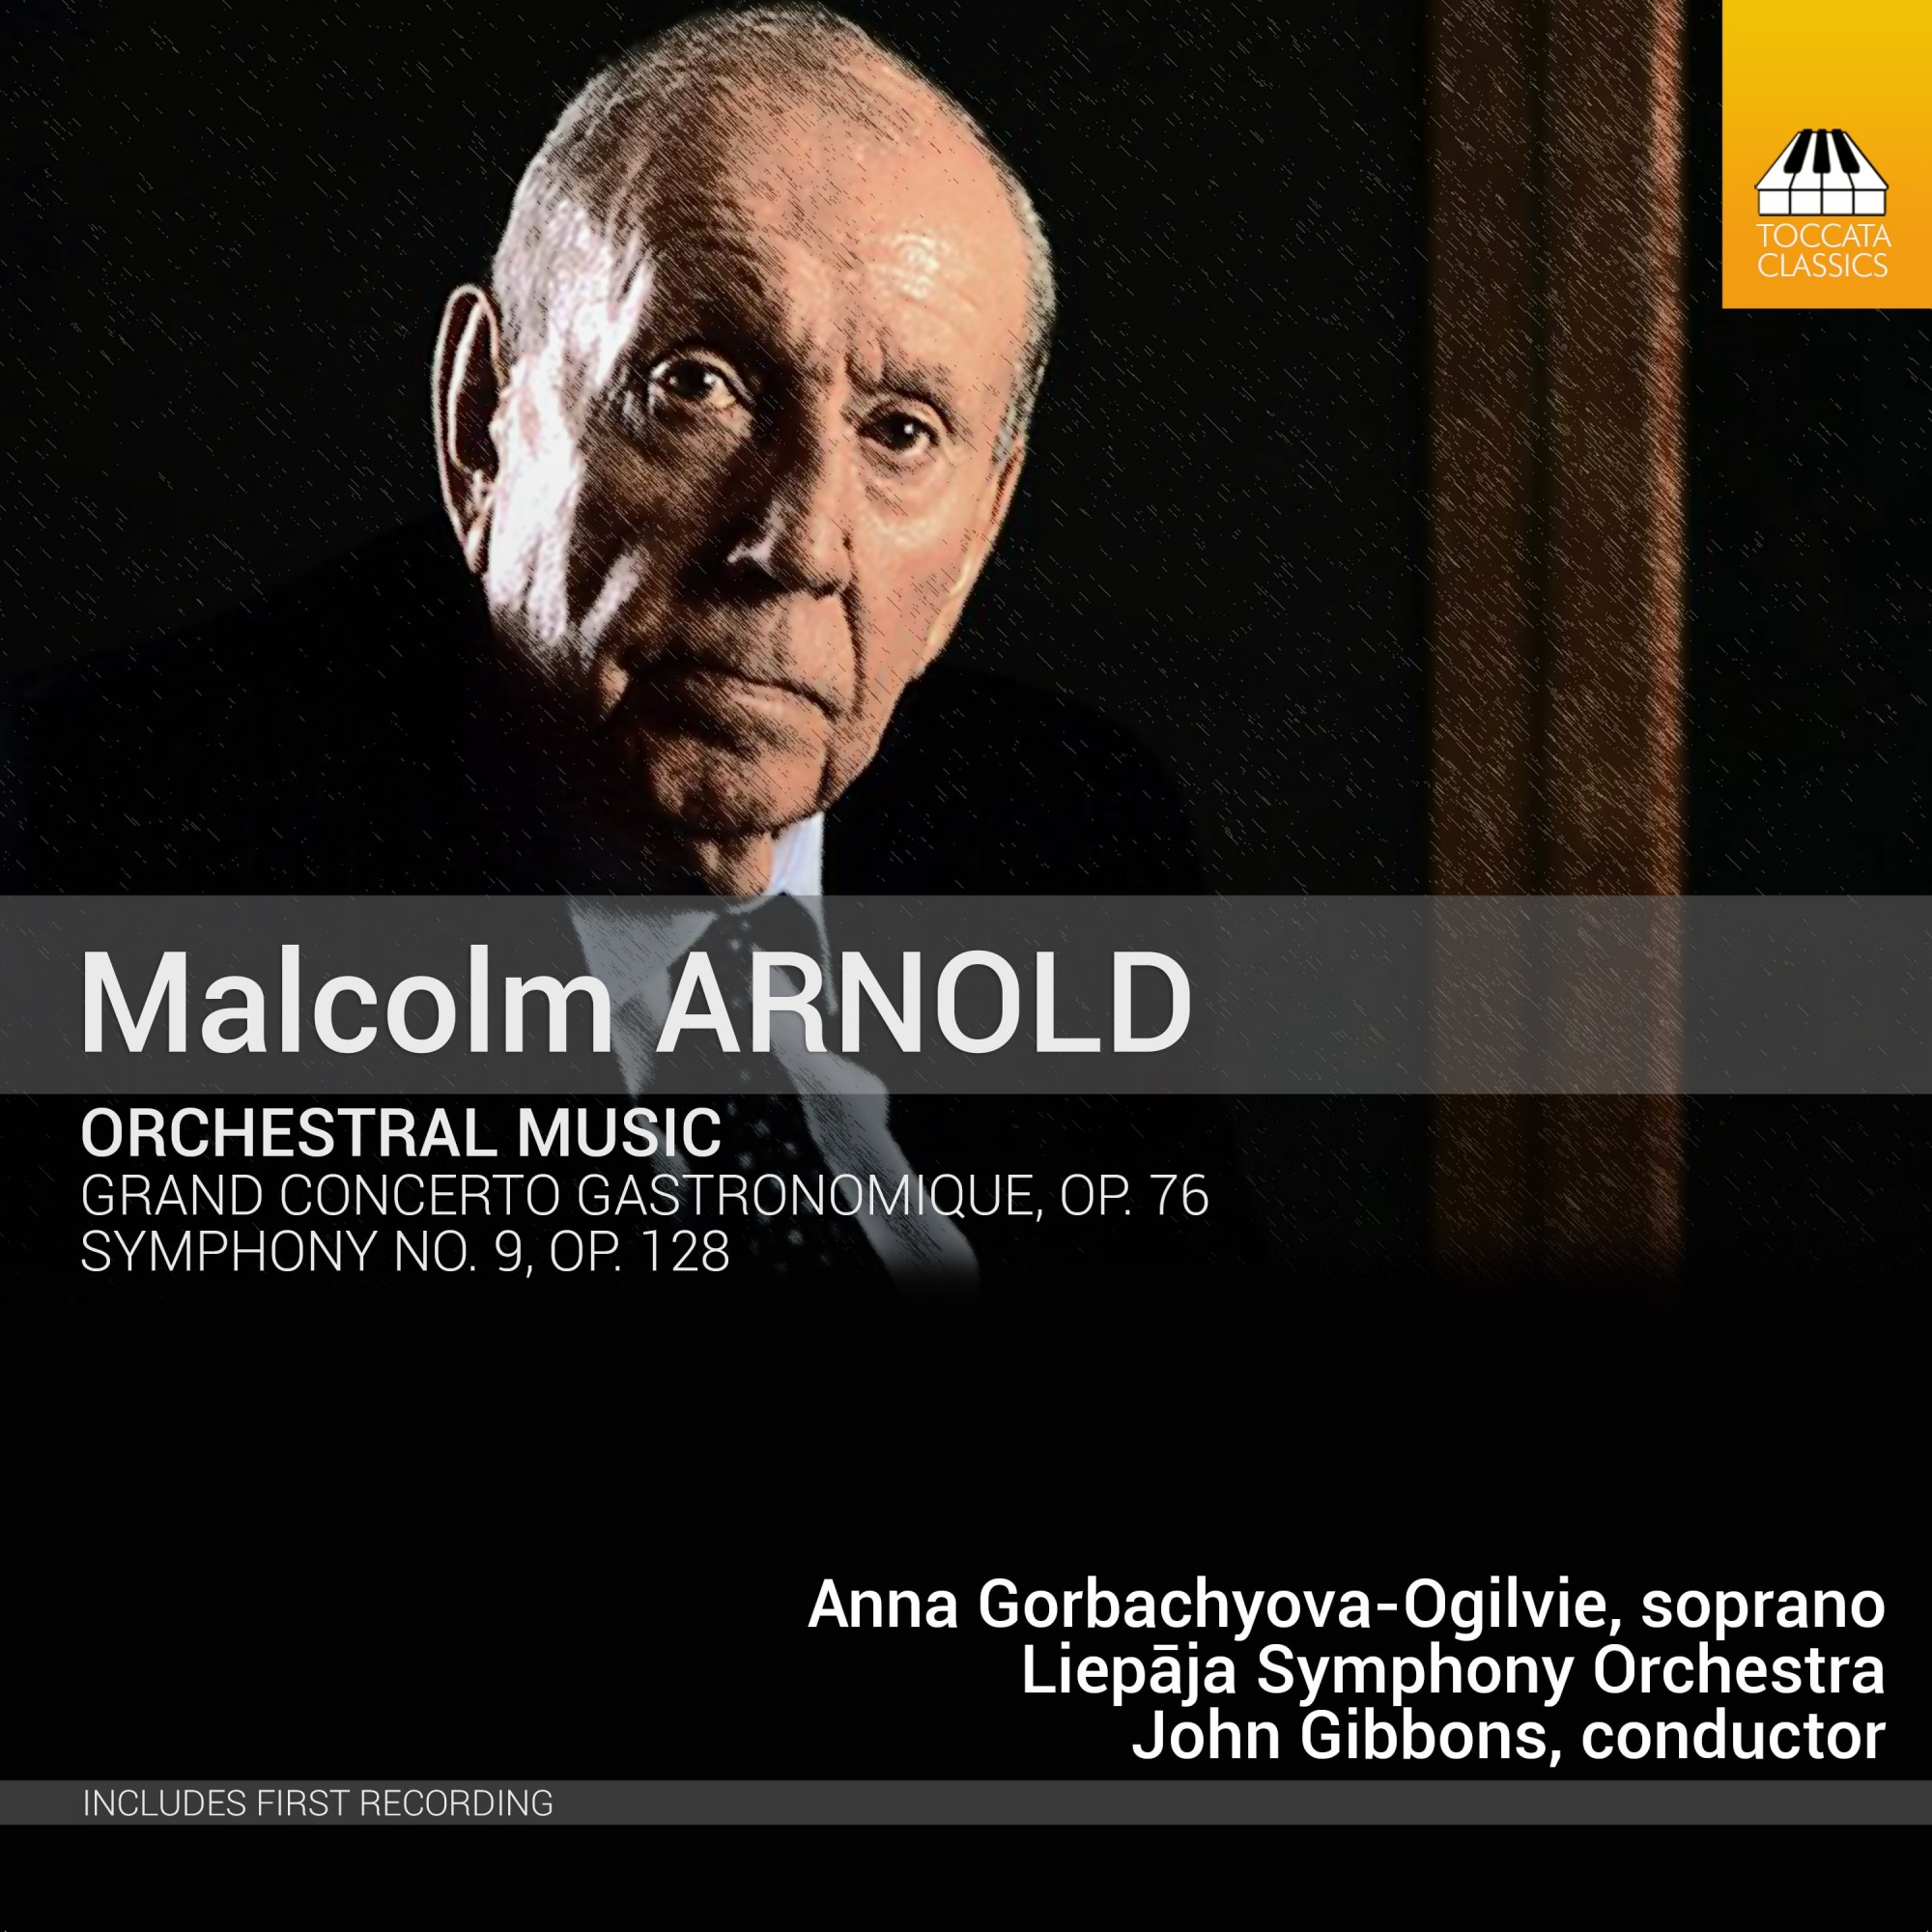 MALCOLM ARNOLD: ORCHESTRAL MUSIC